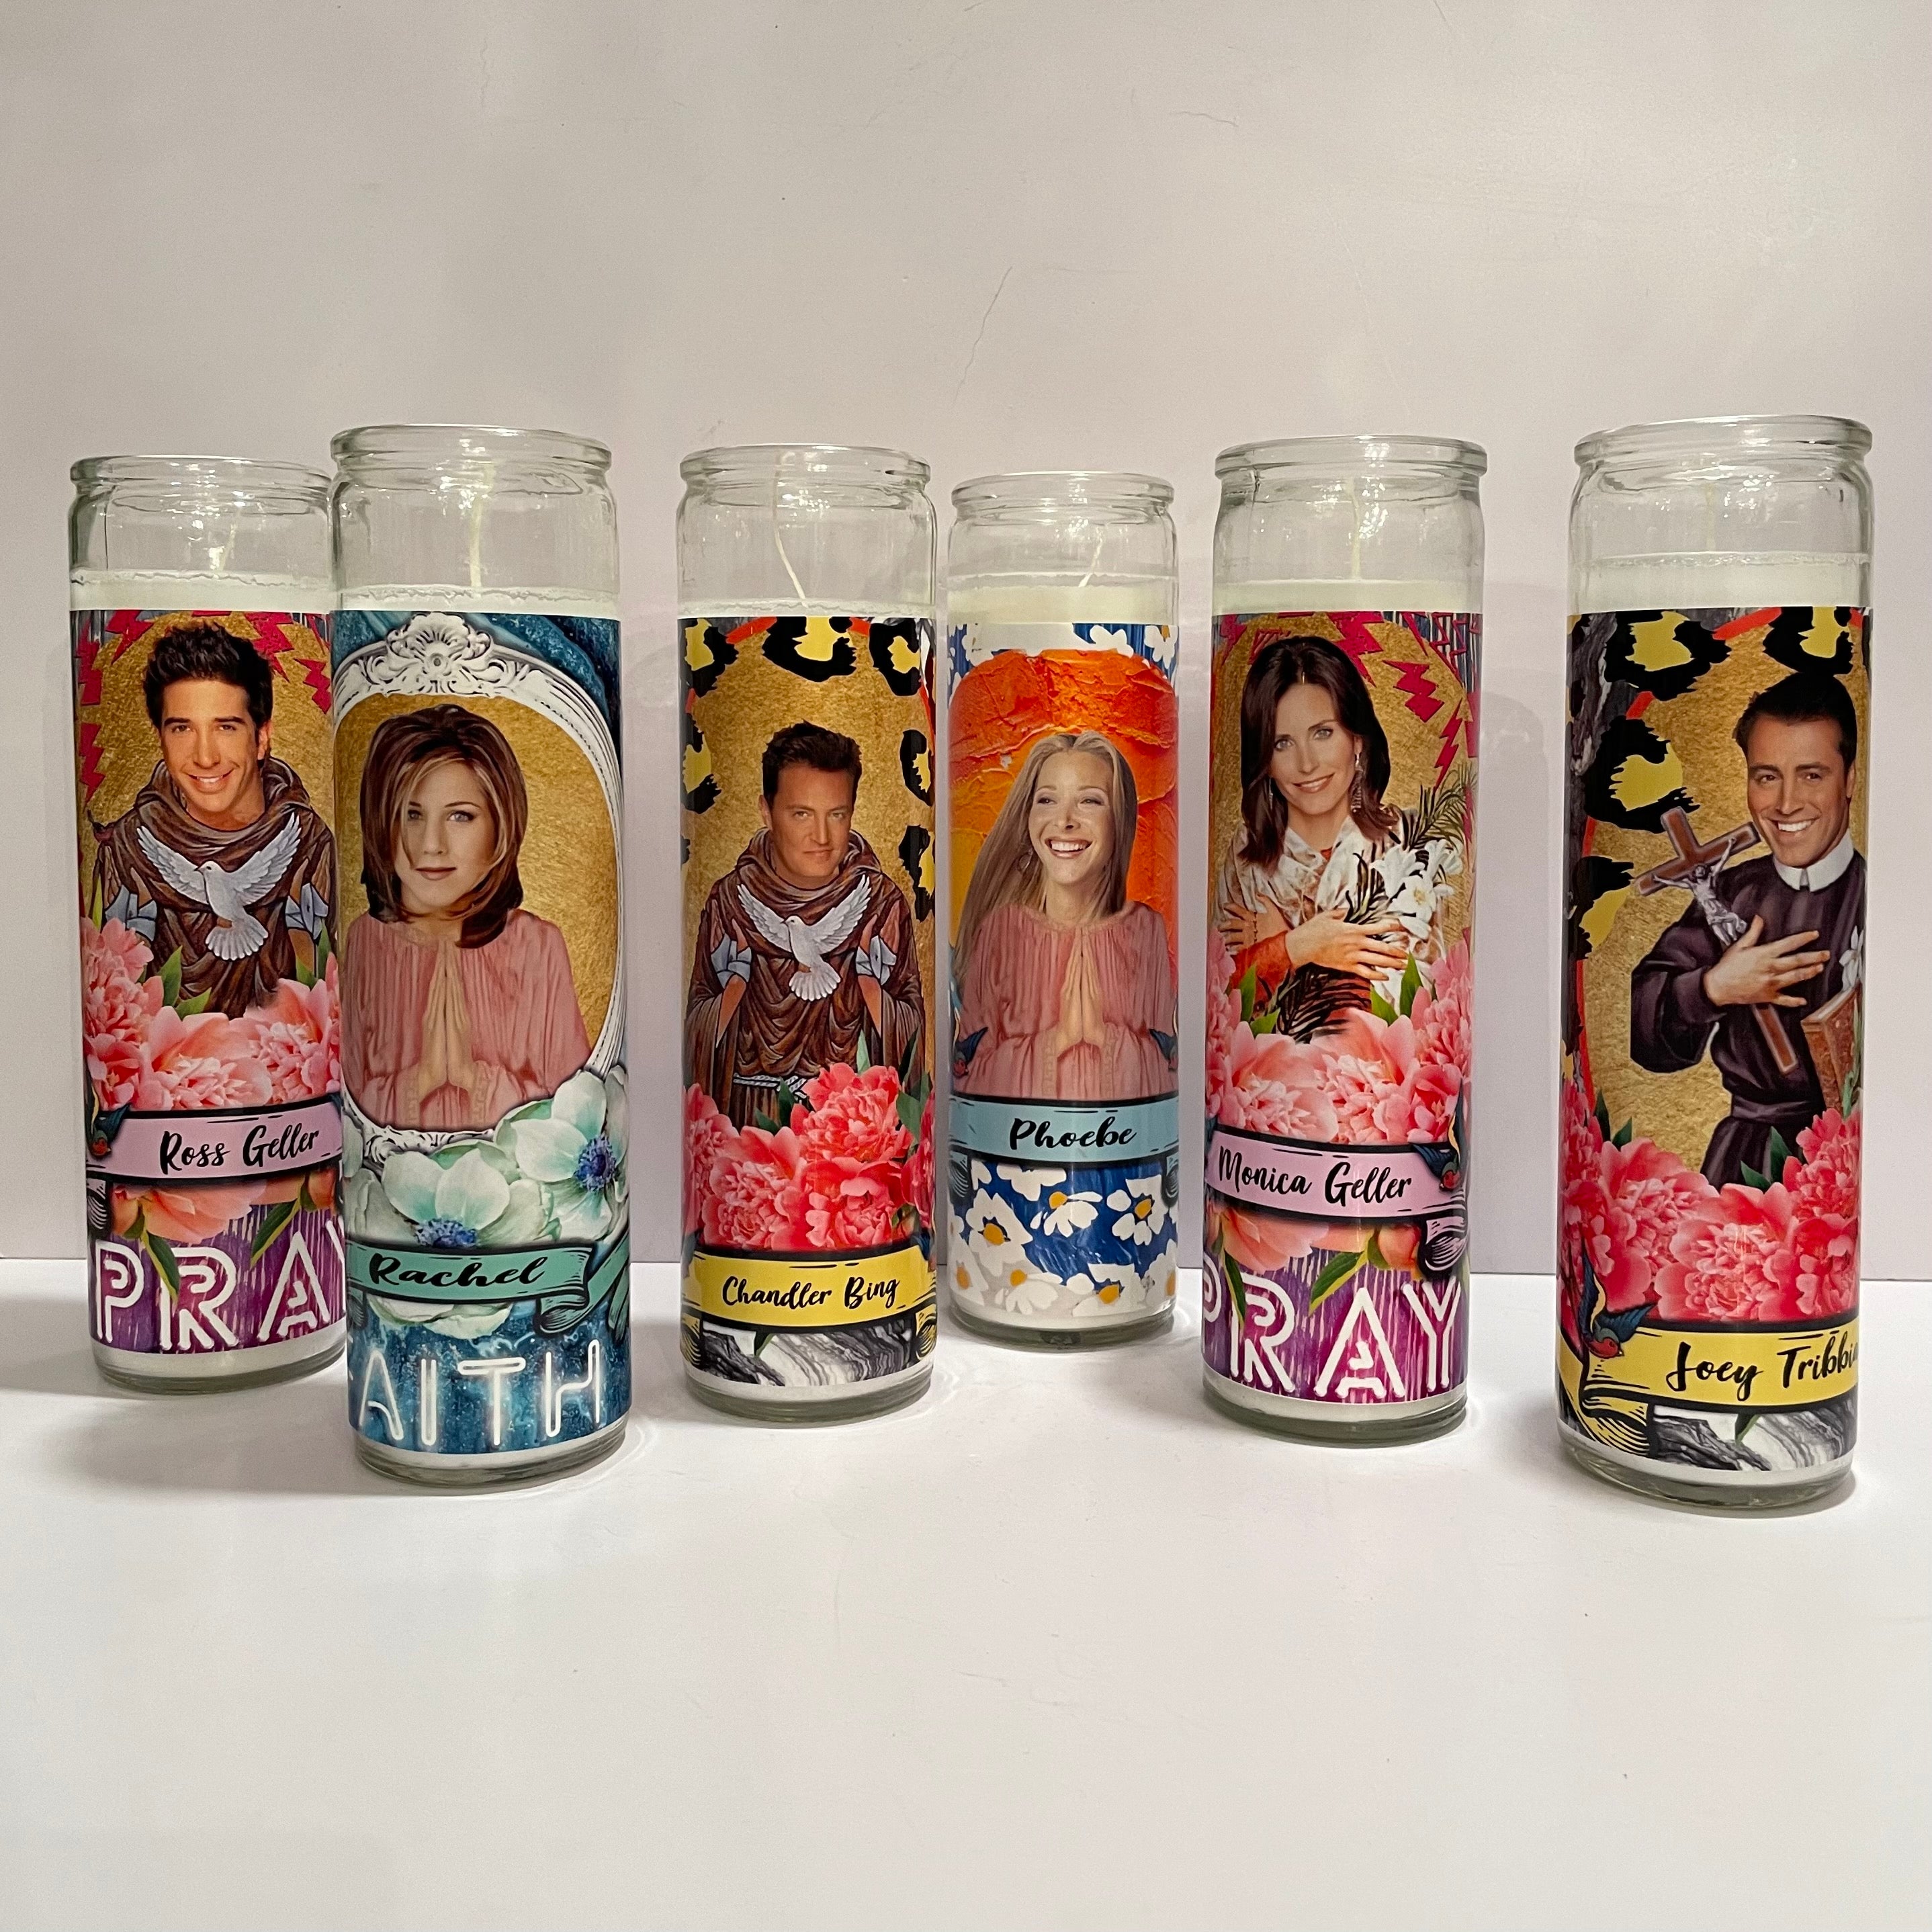 Ross from FRIENDS Prayer Candle